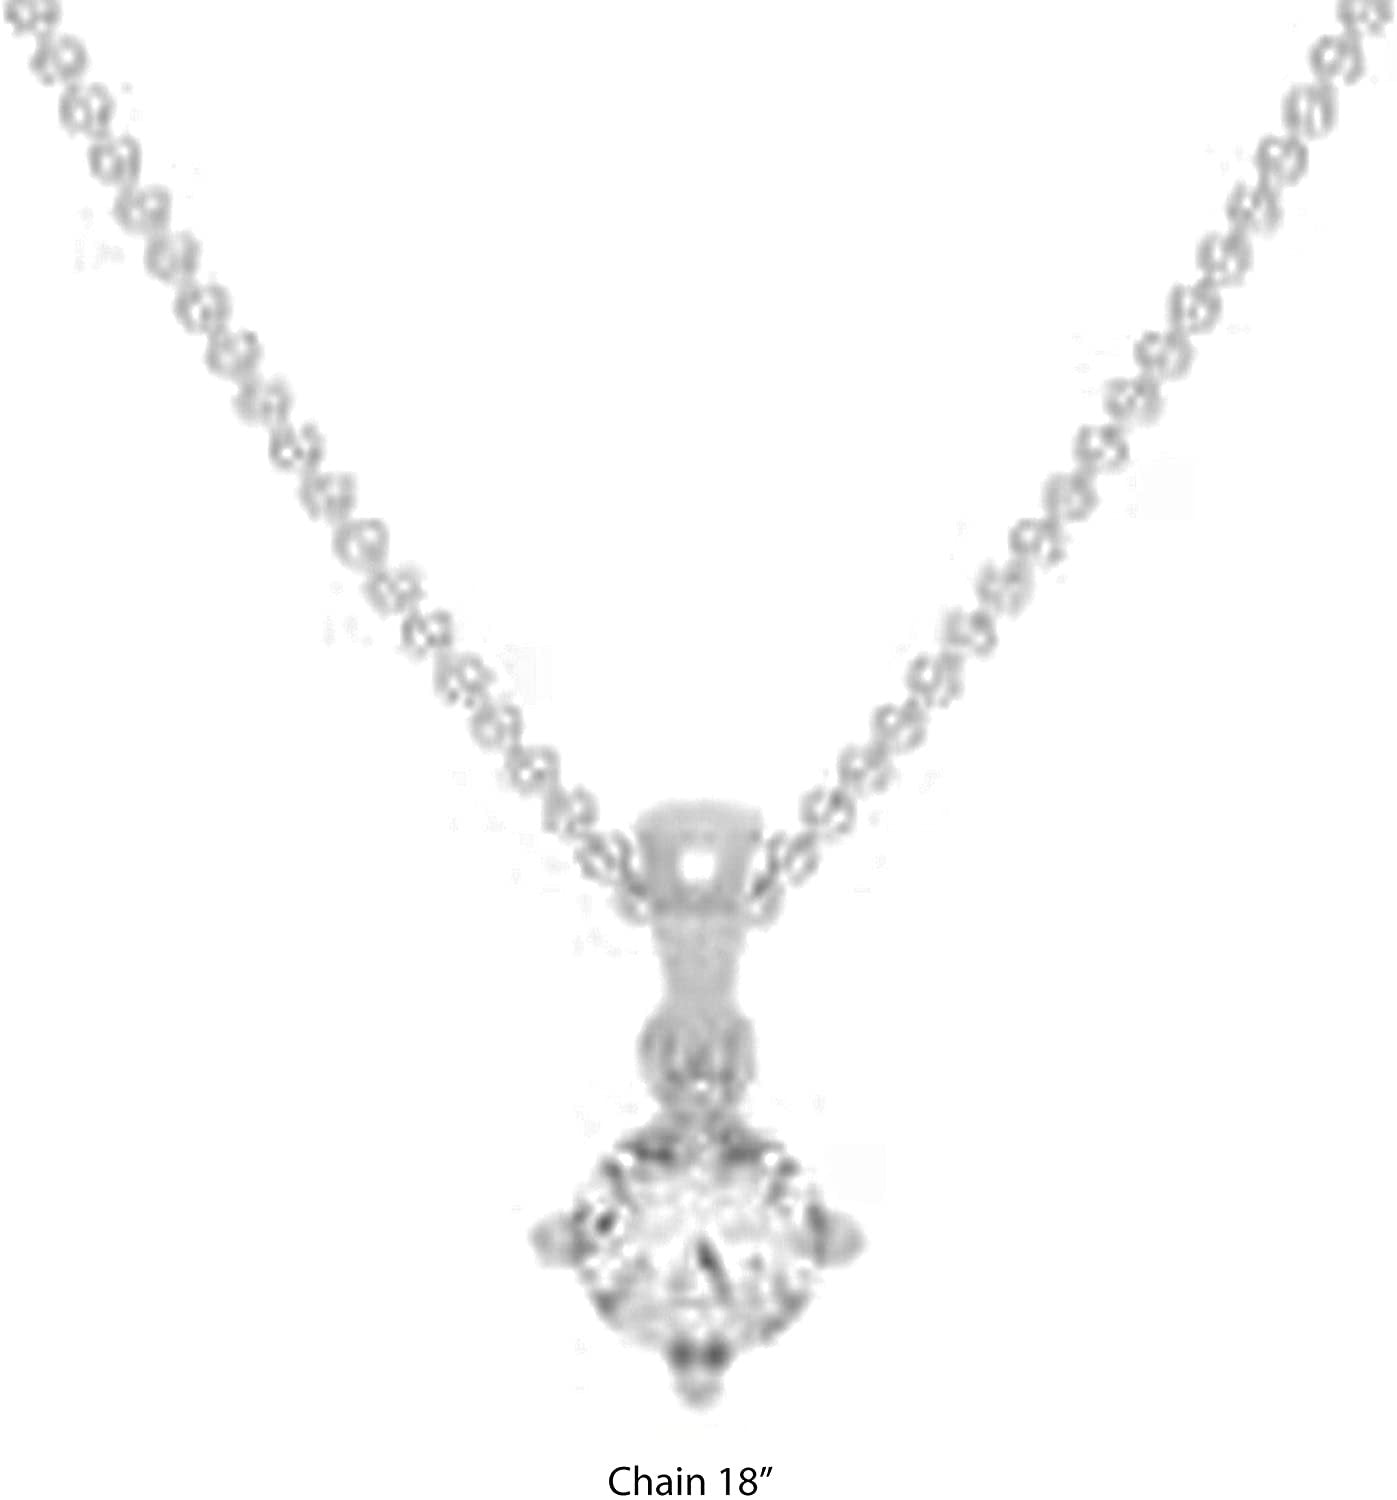 .925 Sterling Silver 1/3 Carat Round Brilliant Cut Lab Grown Diamond Solitaire Pendant Necklace (G-H Color, SI1-SI2 Clarity), 18"